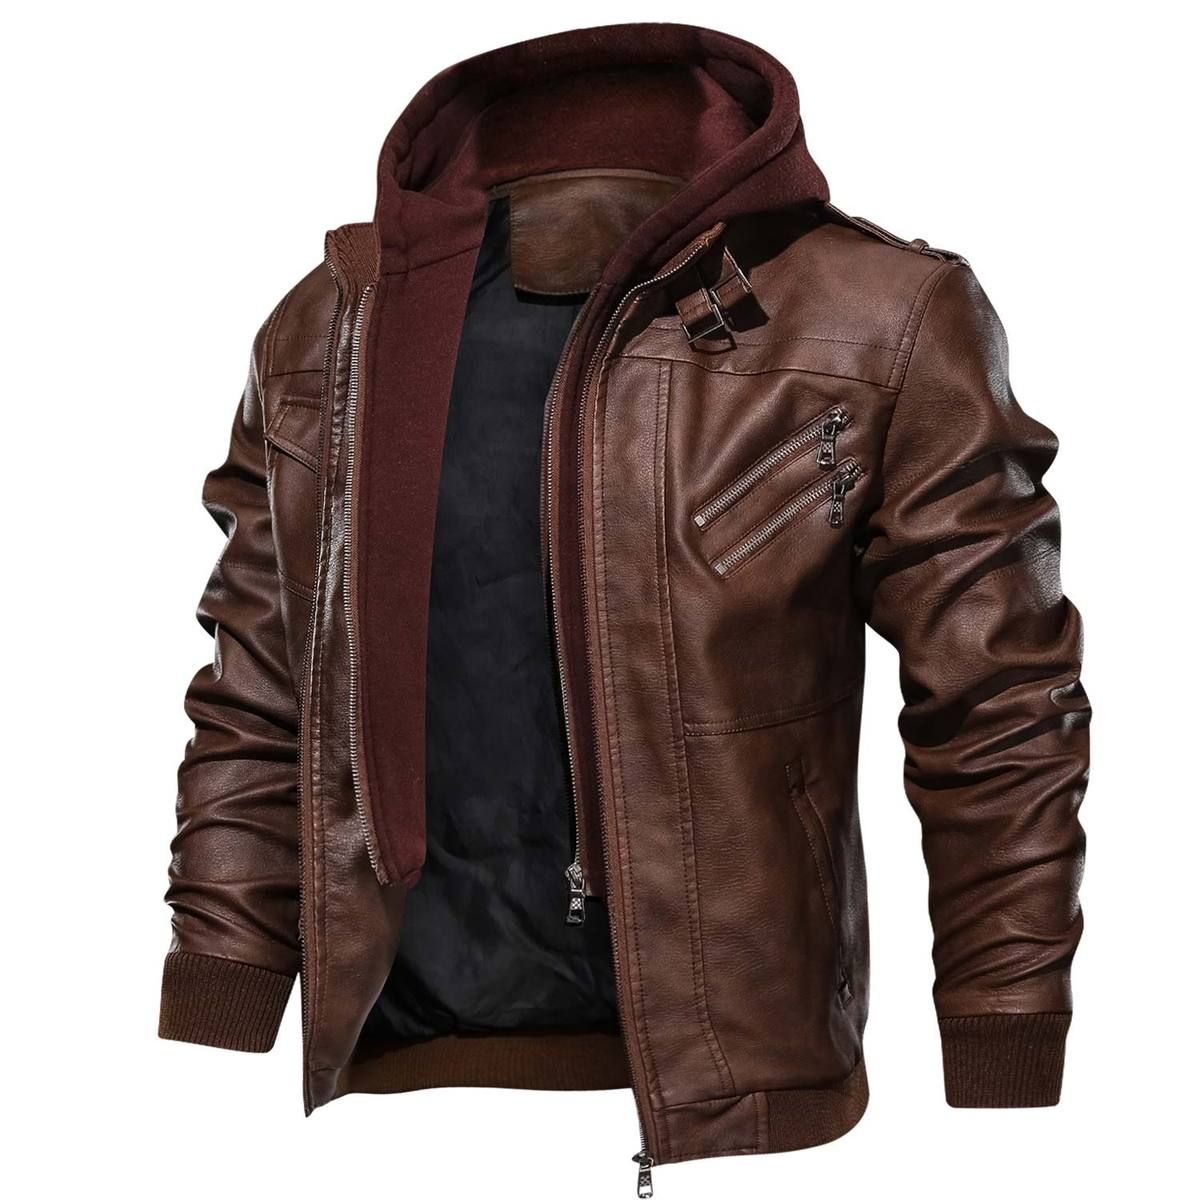 <strong>FOR A CLASSIC AND STYLISH APPEARANCE, TRY THE MEN’S BROWN LEATHER JACKETS!</strong>